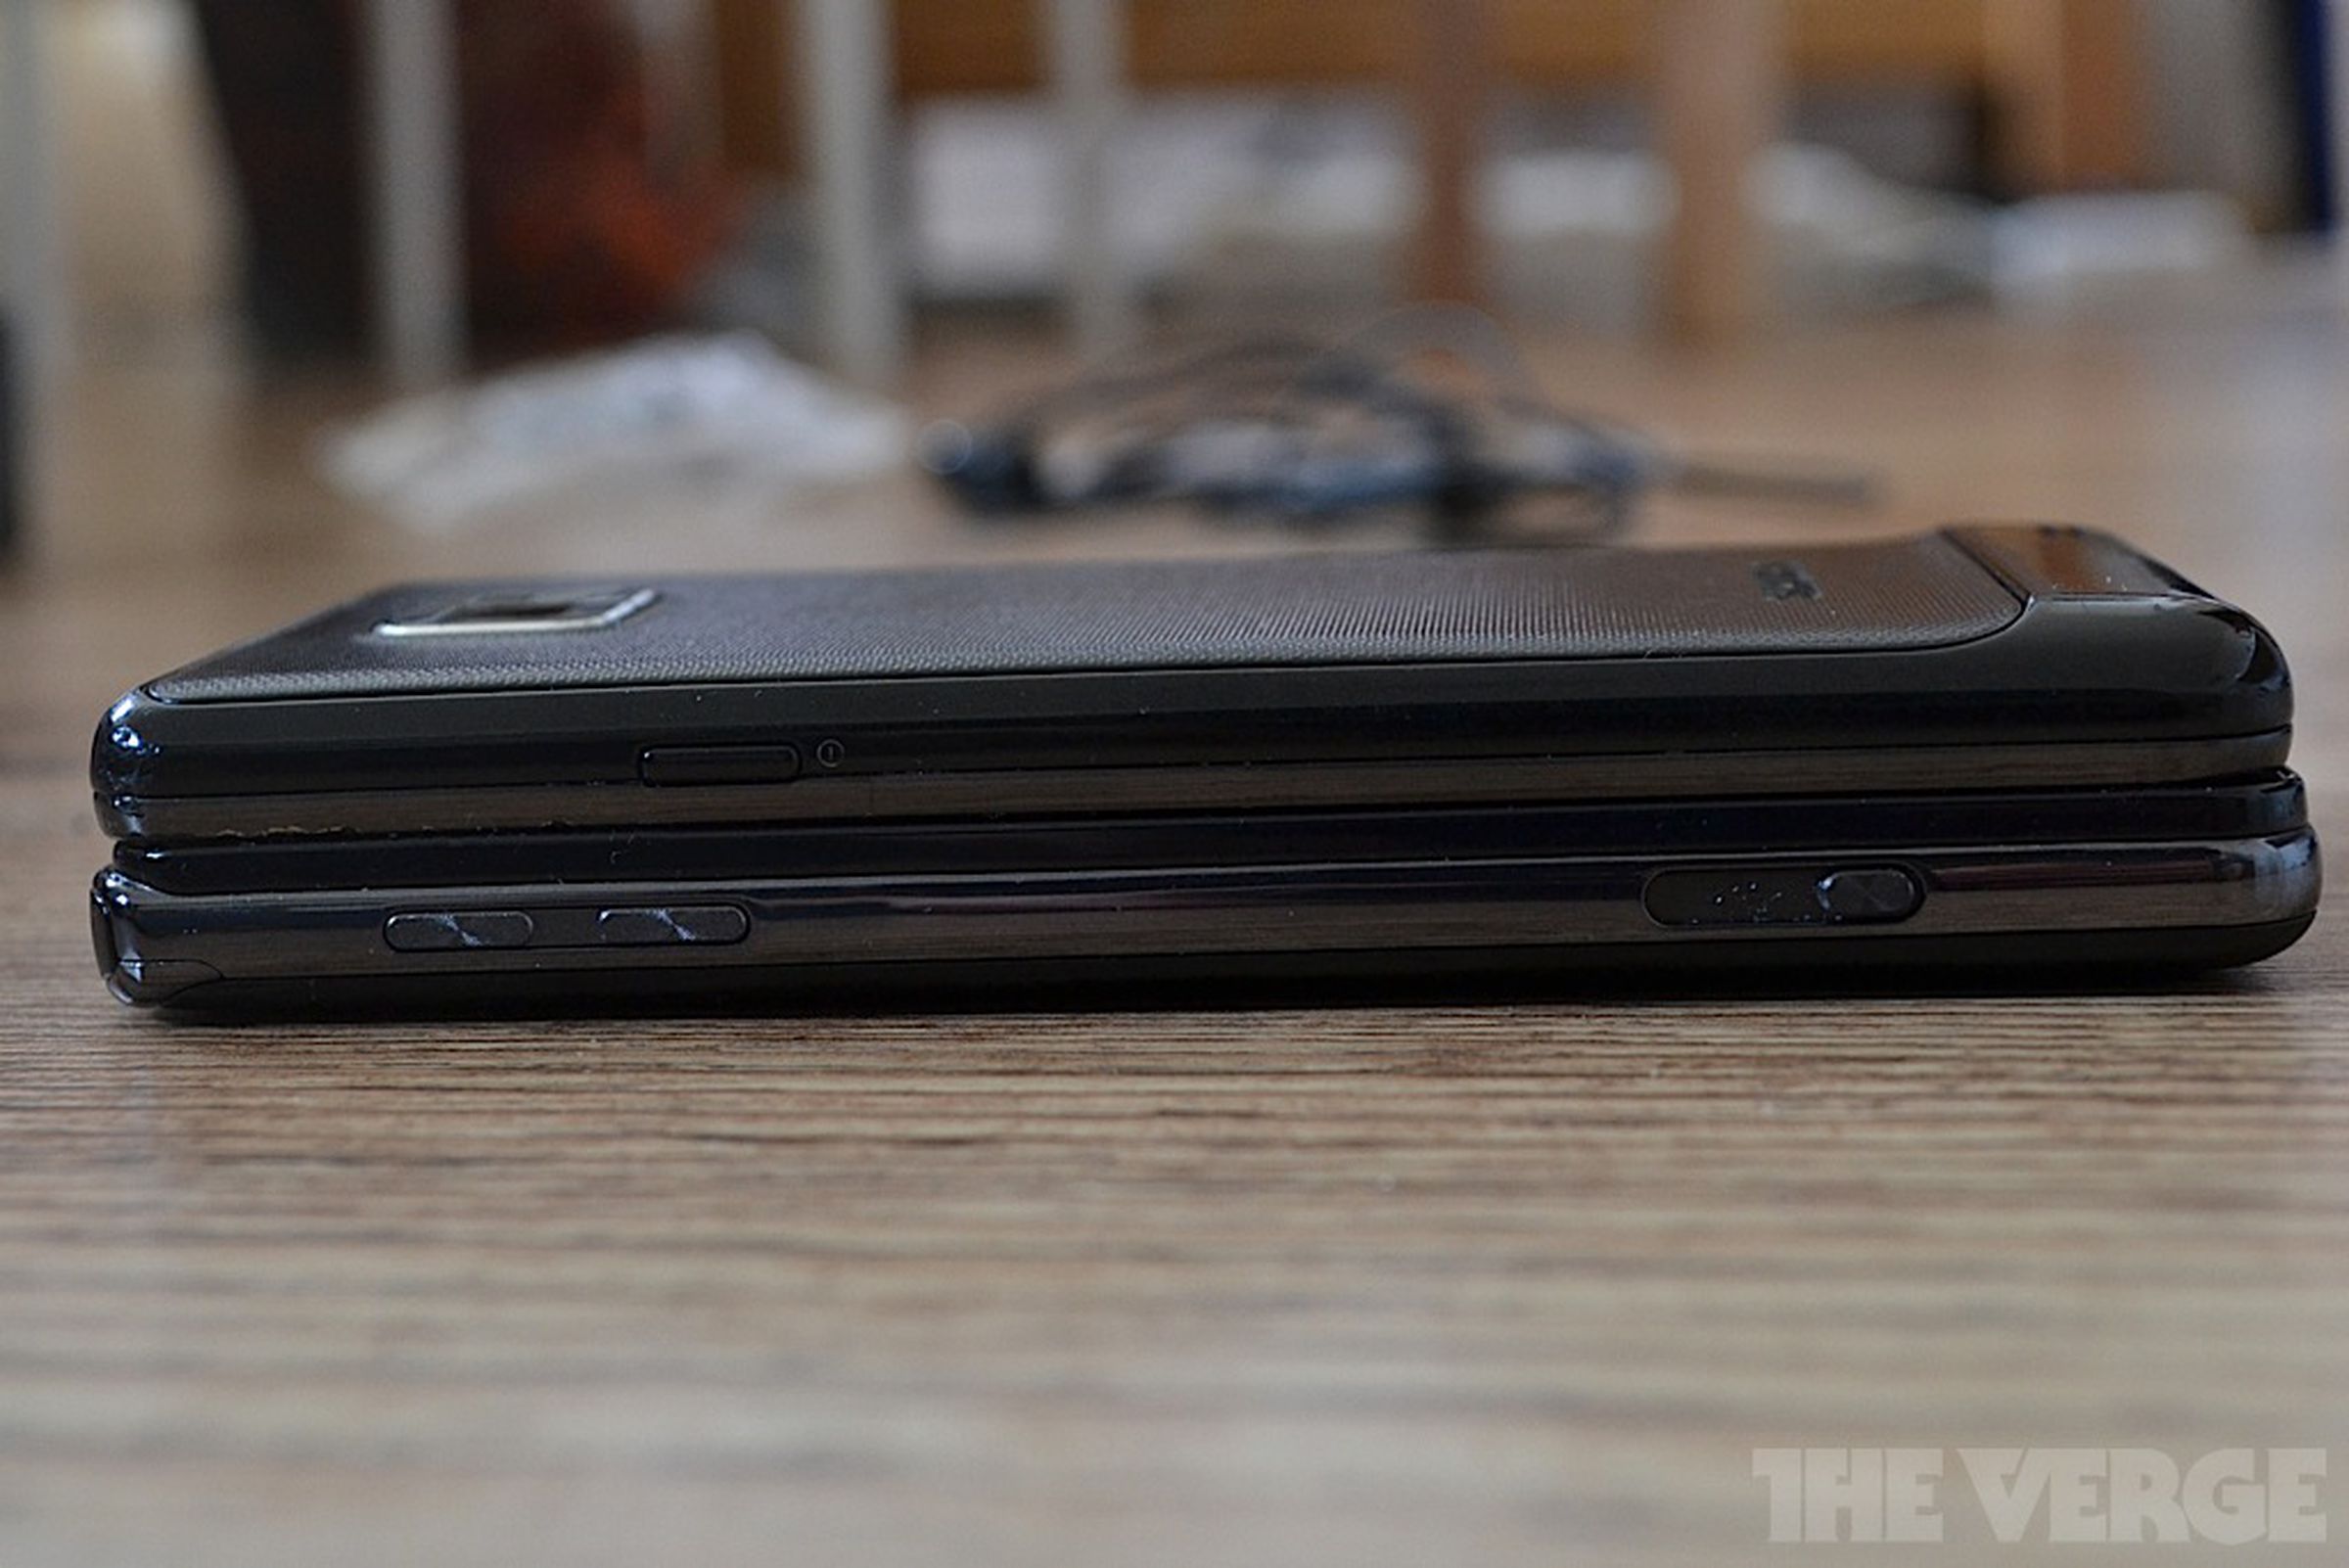 LG Optimus 3D Max hands-on pictures